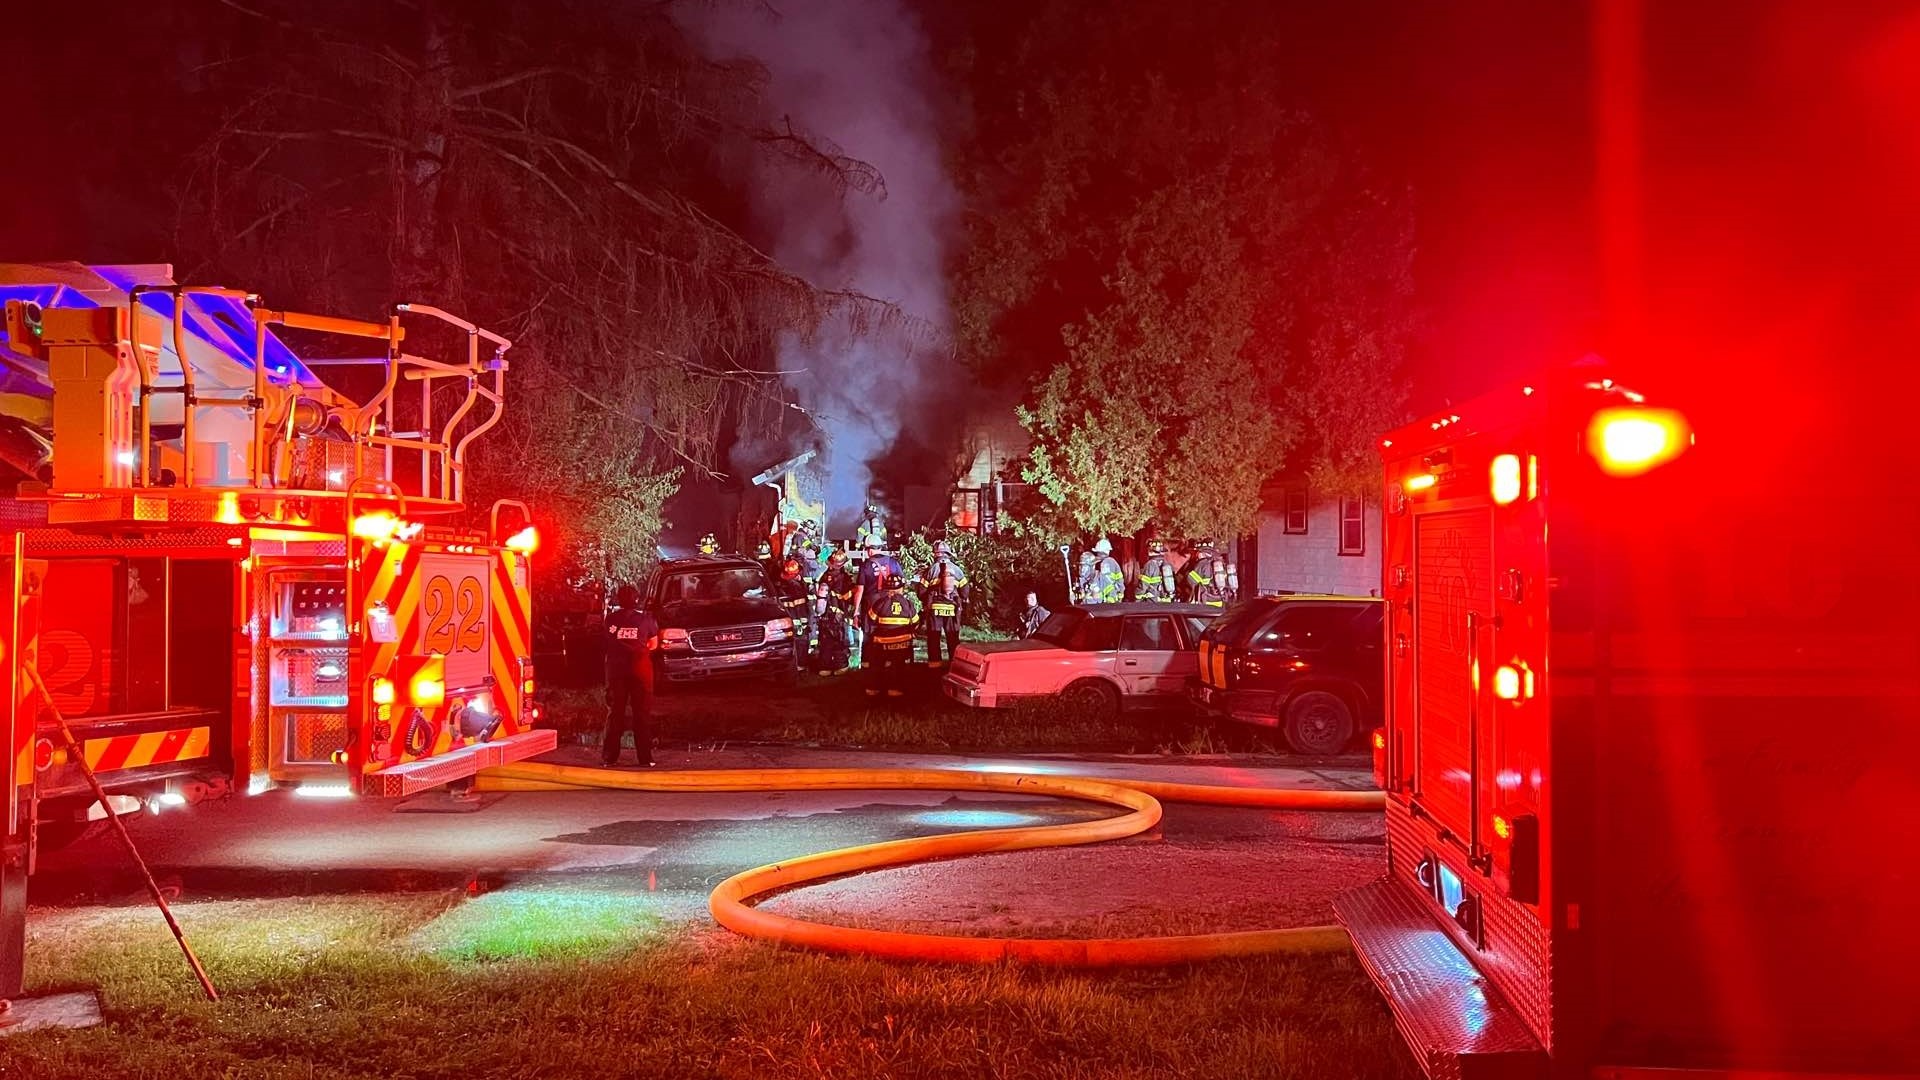 It took Indianapolis firefighters 45 minutes to put out a fire at a house Thursday in the 3900 block of Millersville Drive, near 38th Street and Keystone Avenue.